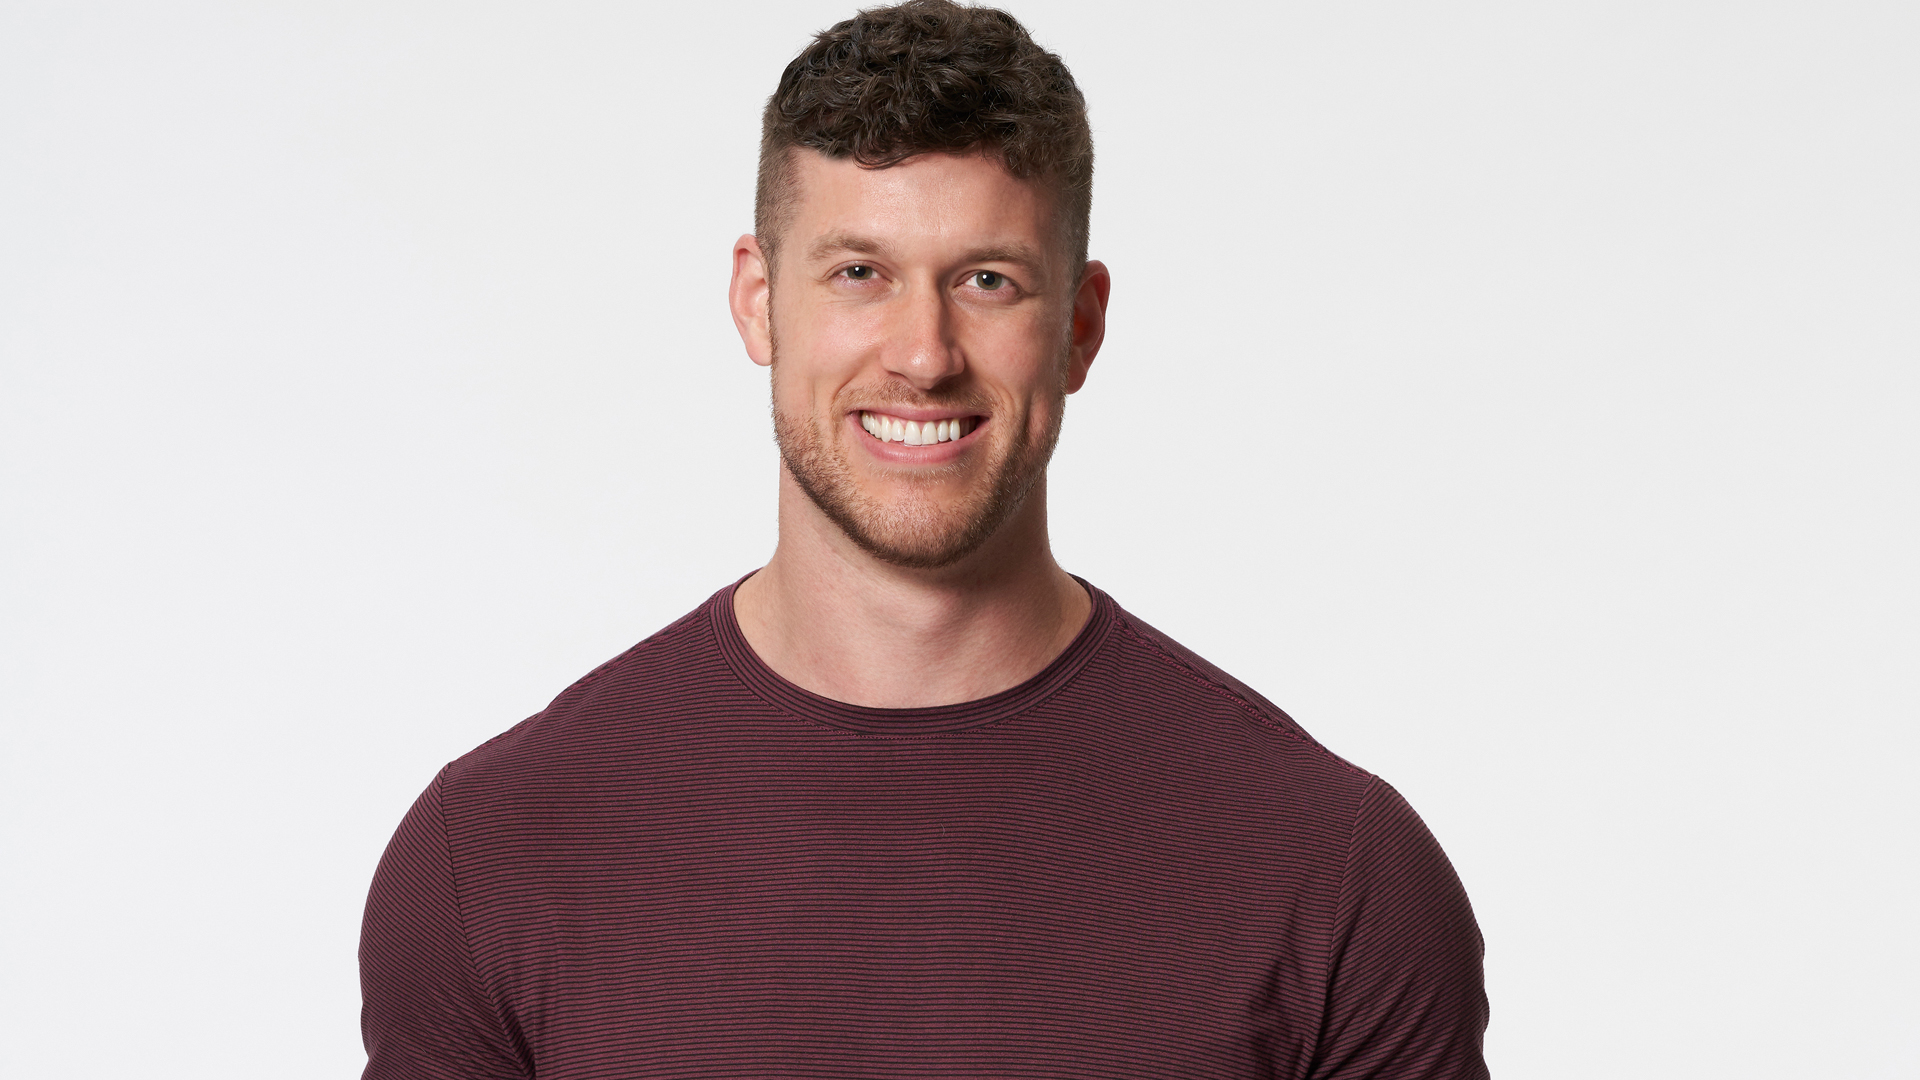 Headshot of Clayton Echard from Bachelor Nation’s ‘The Bachelorette’ Season 18 with Michelle Young